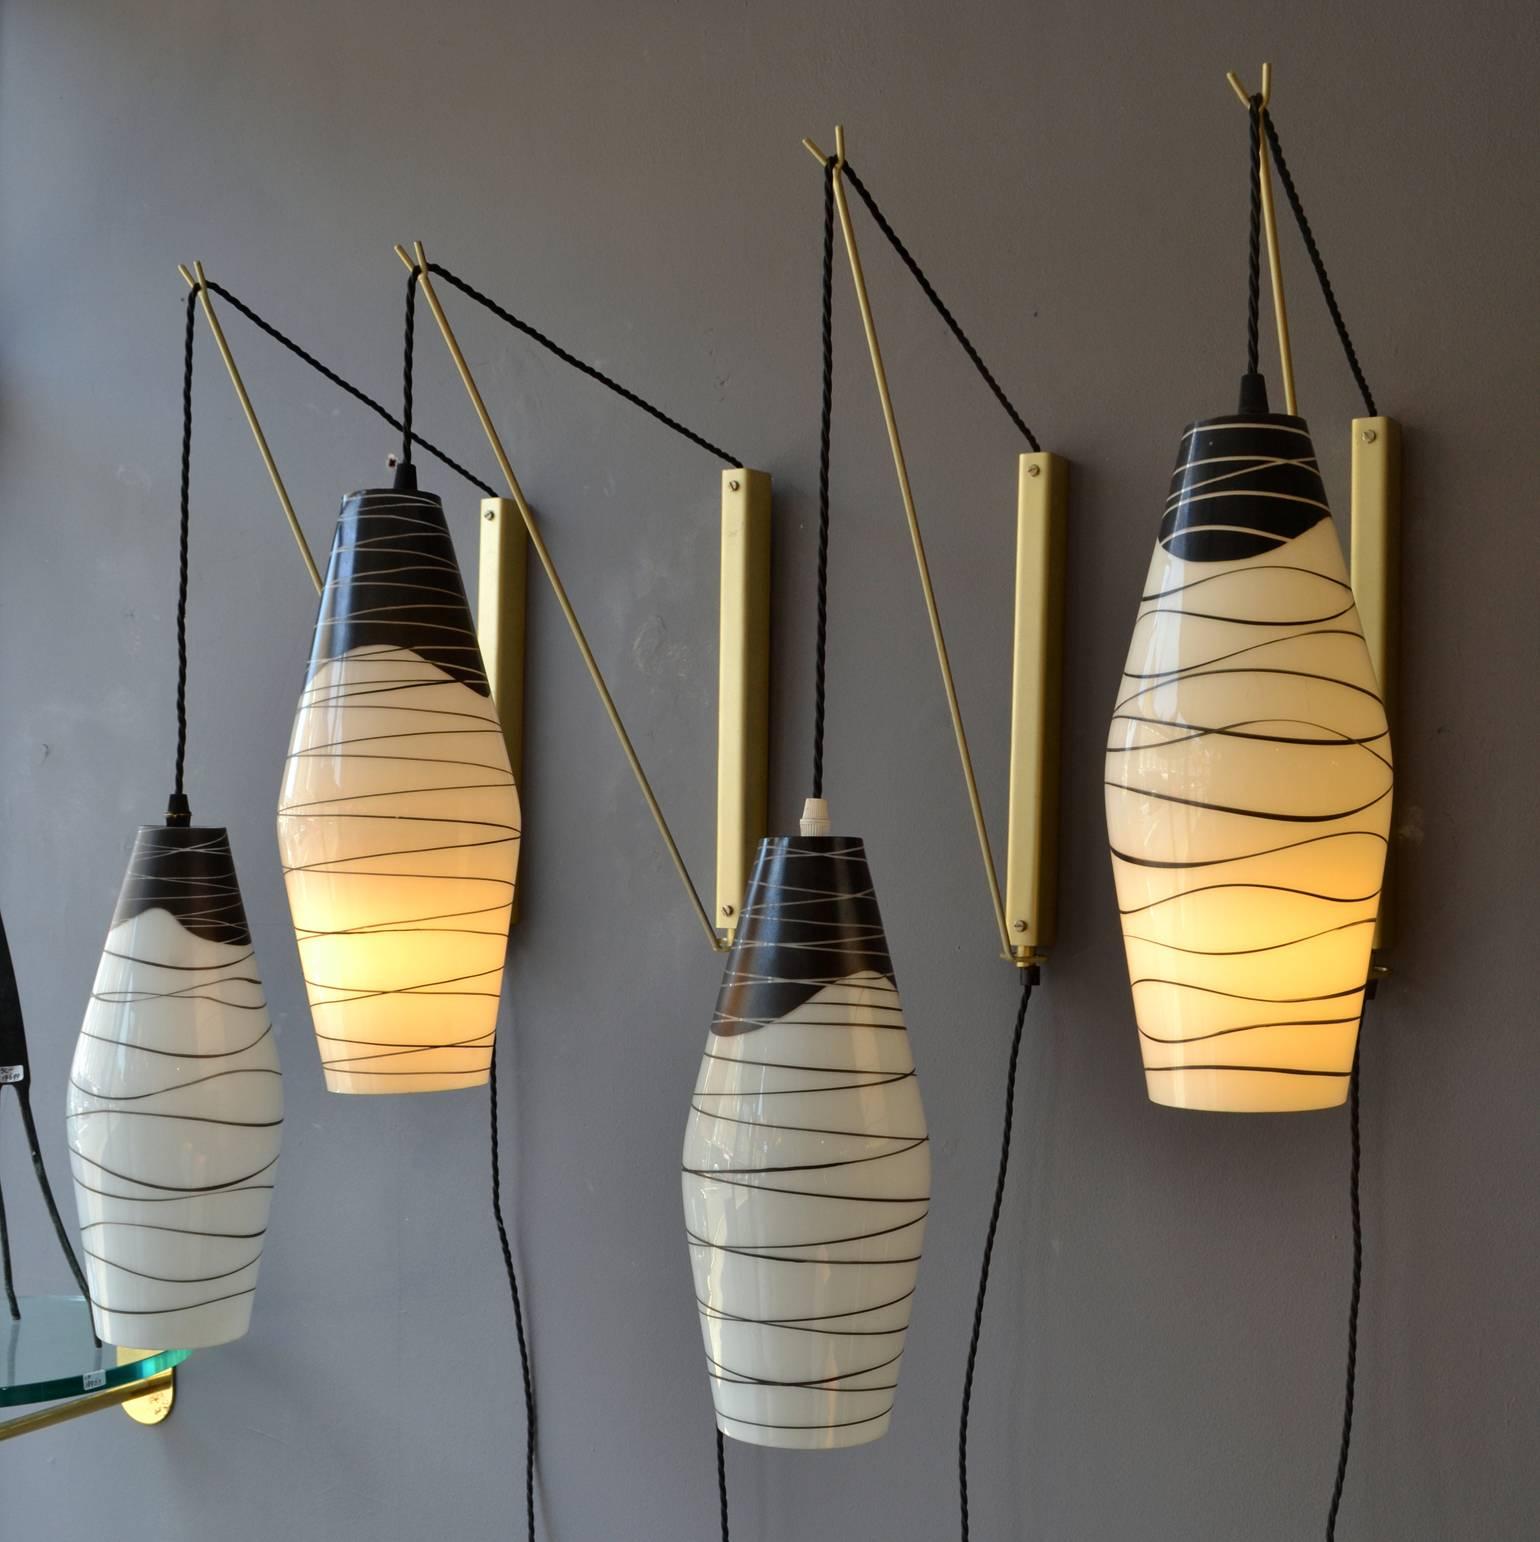 Two pairs of wall-mounted pendants with opal shades hand painted in black hanging of black braided flex on an adjustable bronzed metal bracket. The height of the flex can be adjusted and the metal bracket allows the lamps to hang closer or further